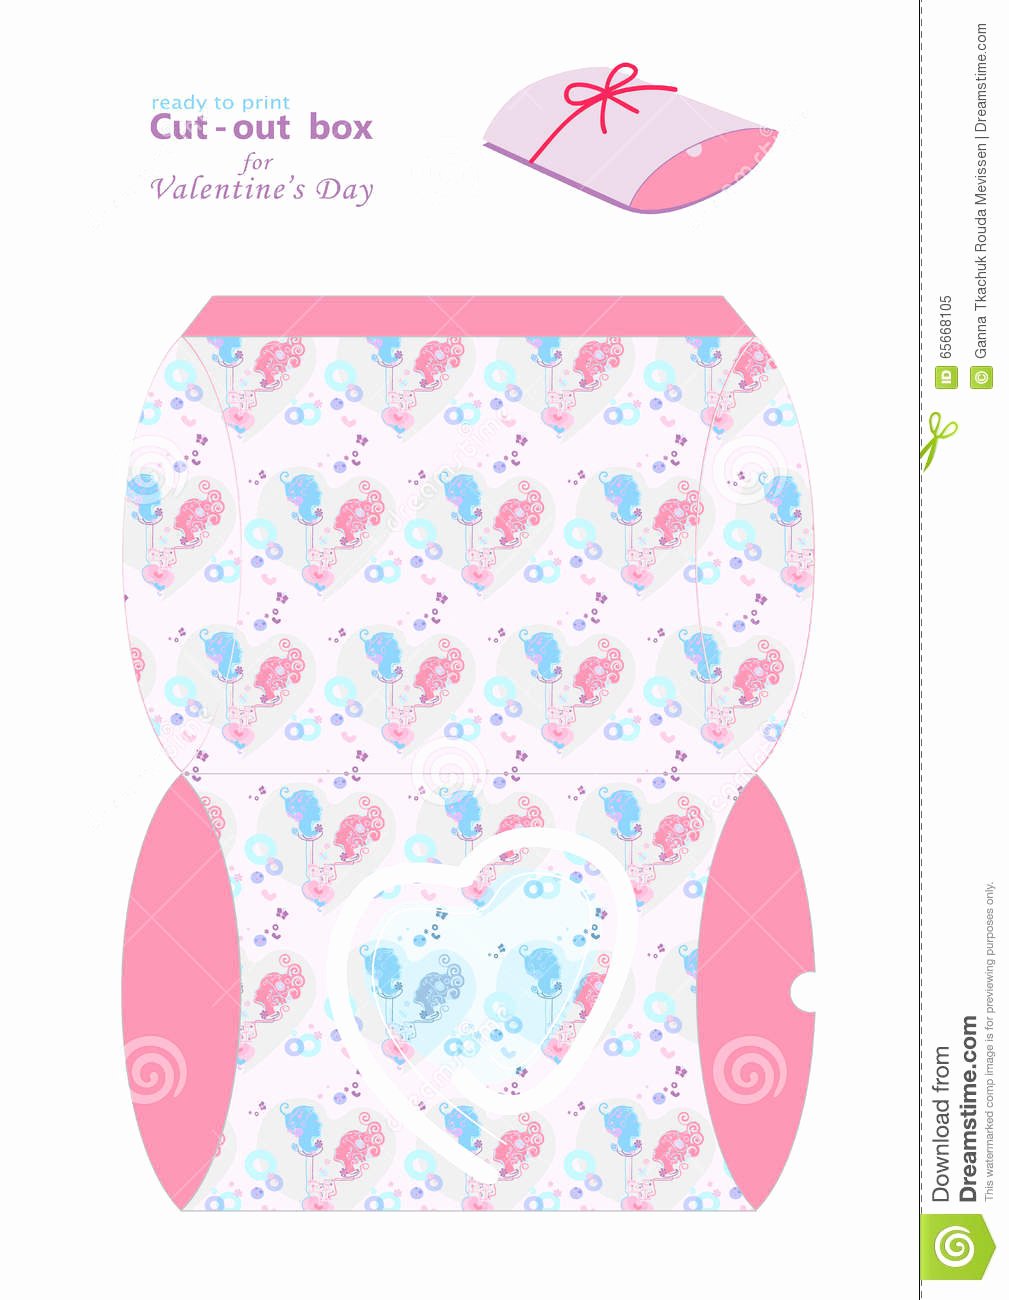 Box Cut Out Patterns Elegant St Valentine S Day Box for Cut Out Stock Vector Image